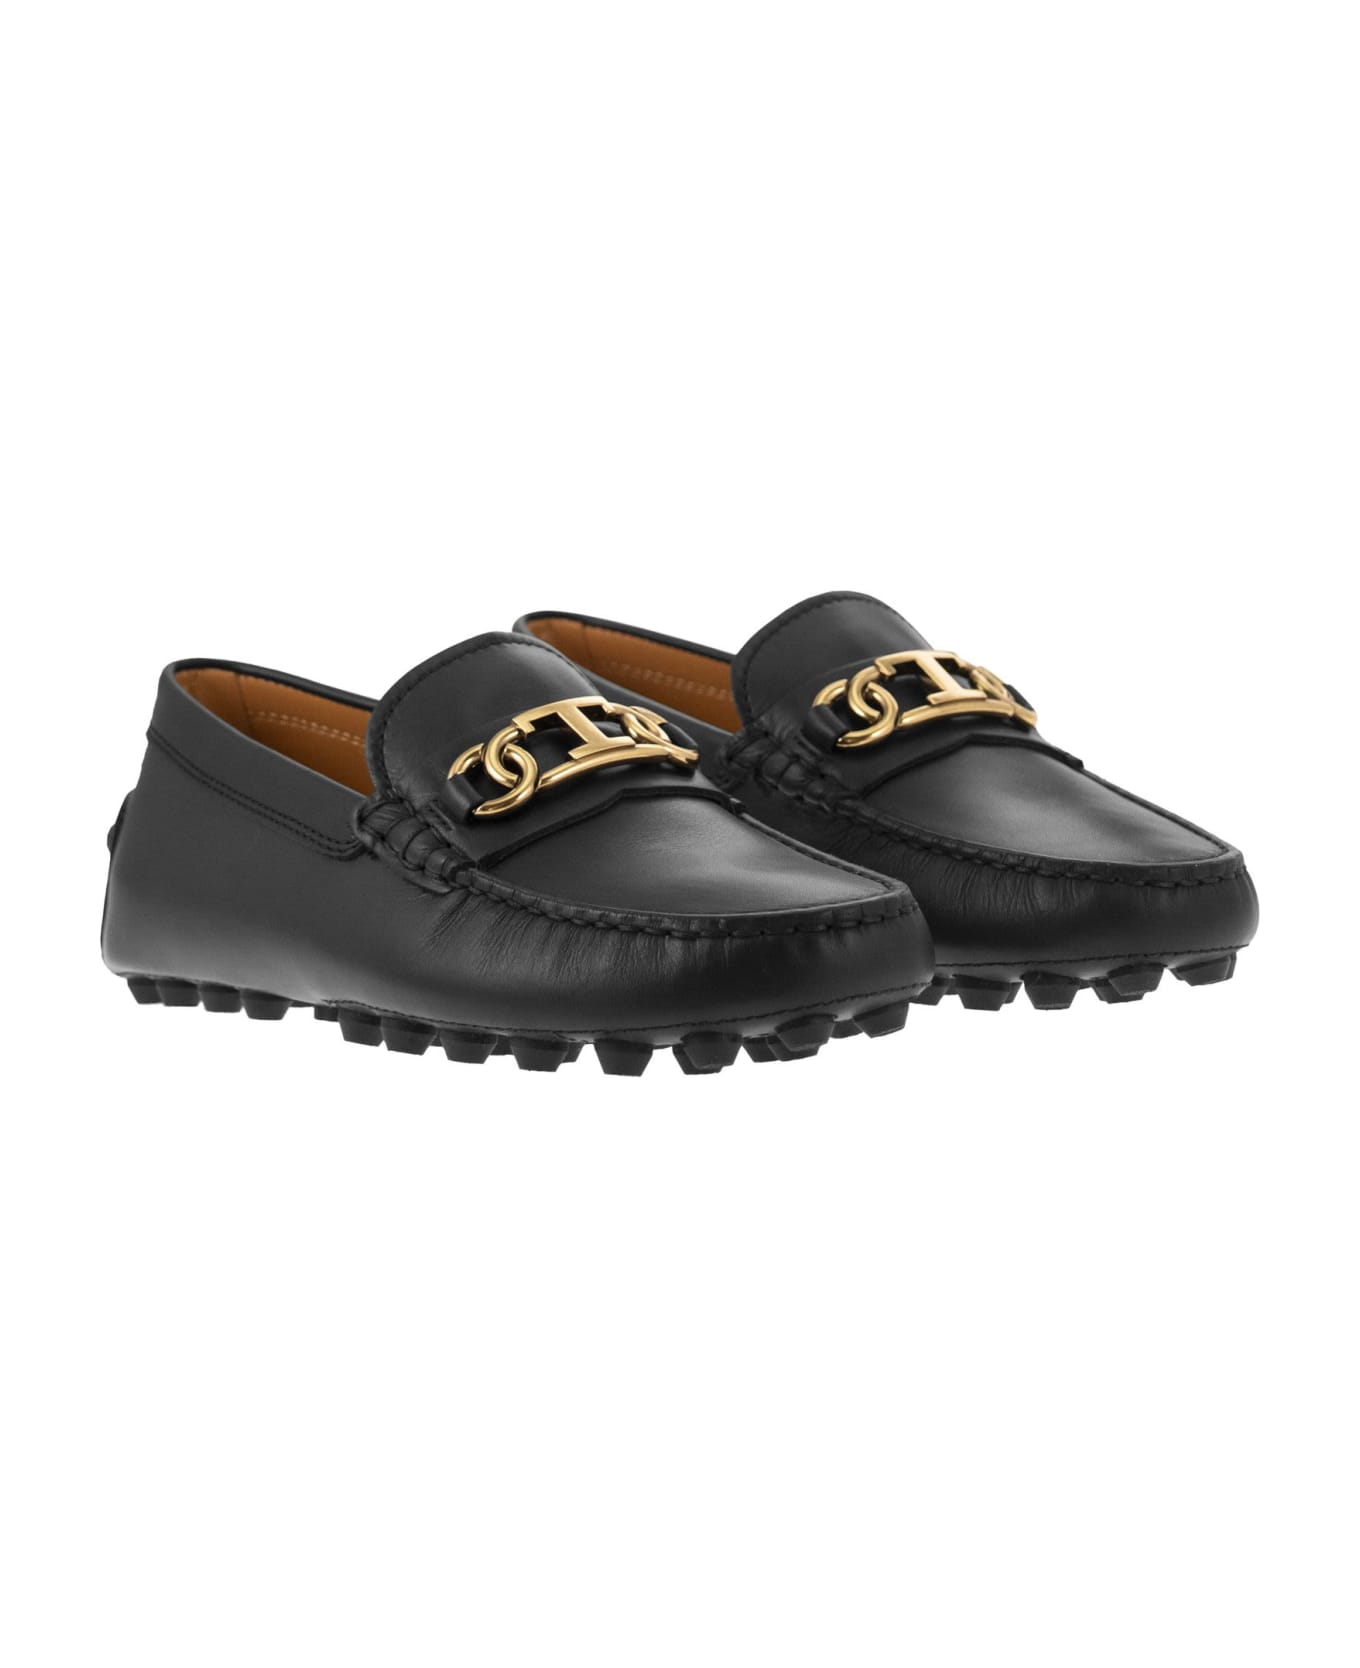 Tod's Leather Moccasin - Black